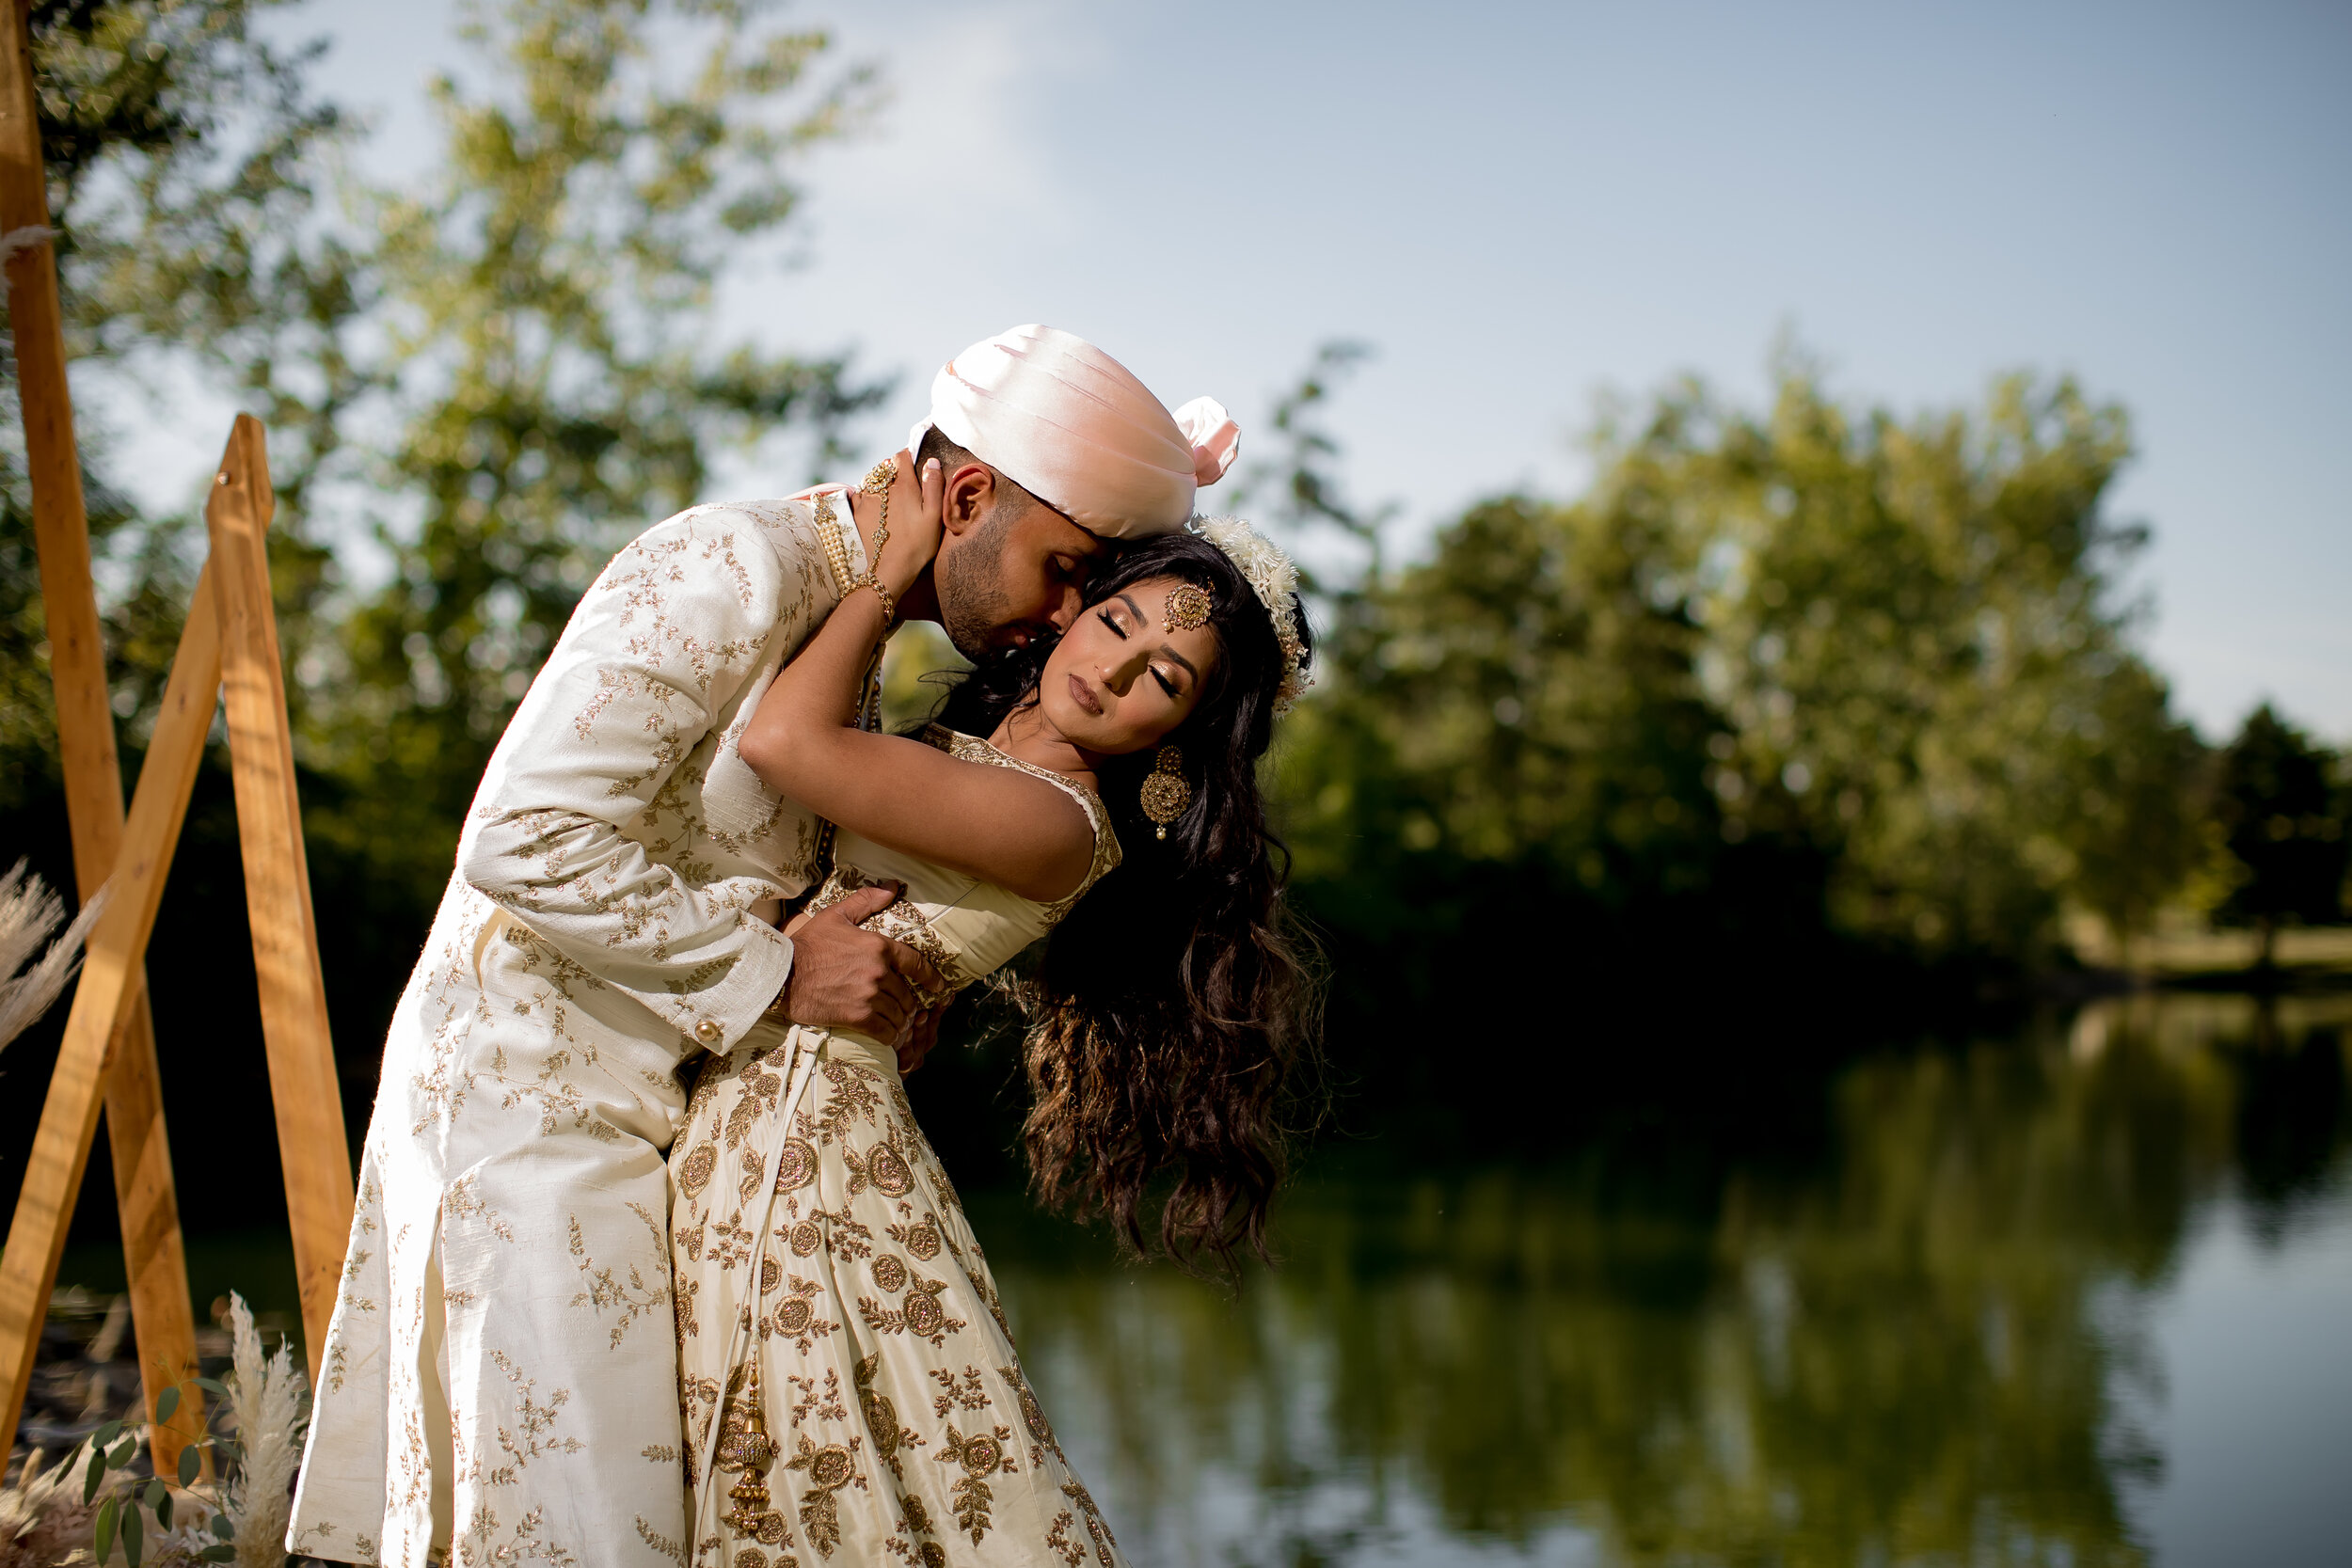 Boho-Chic Meets Indian Fusion Royalty Wedding Inspiration featured on CHI thee WED